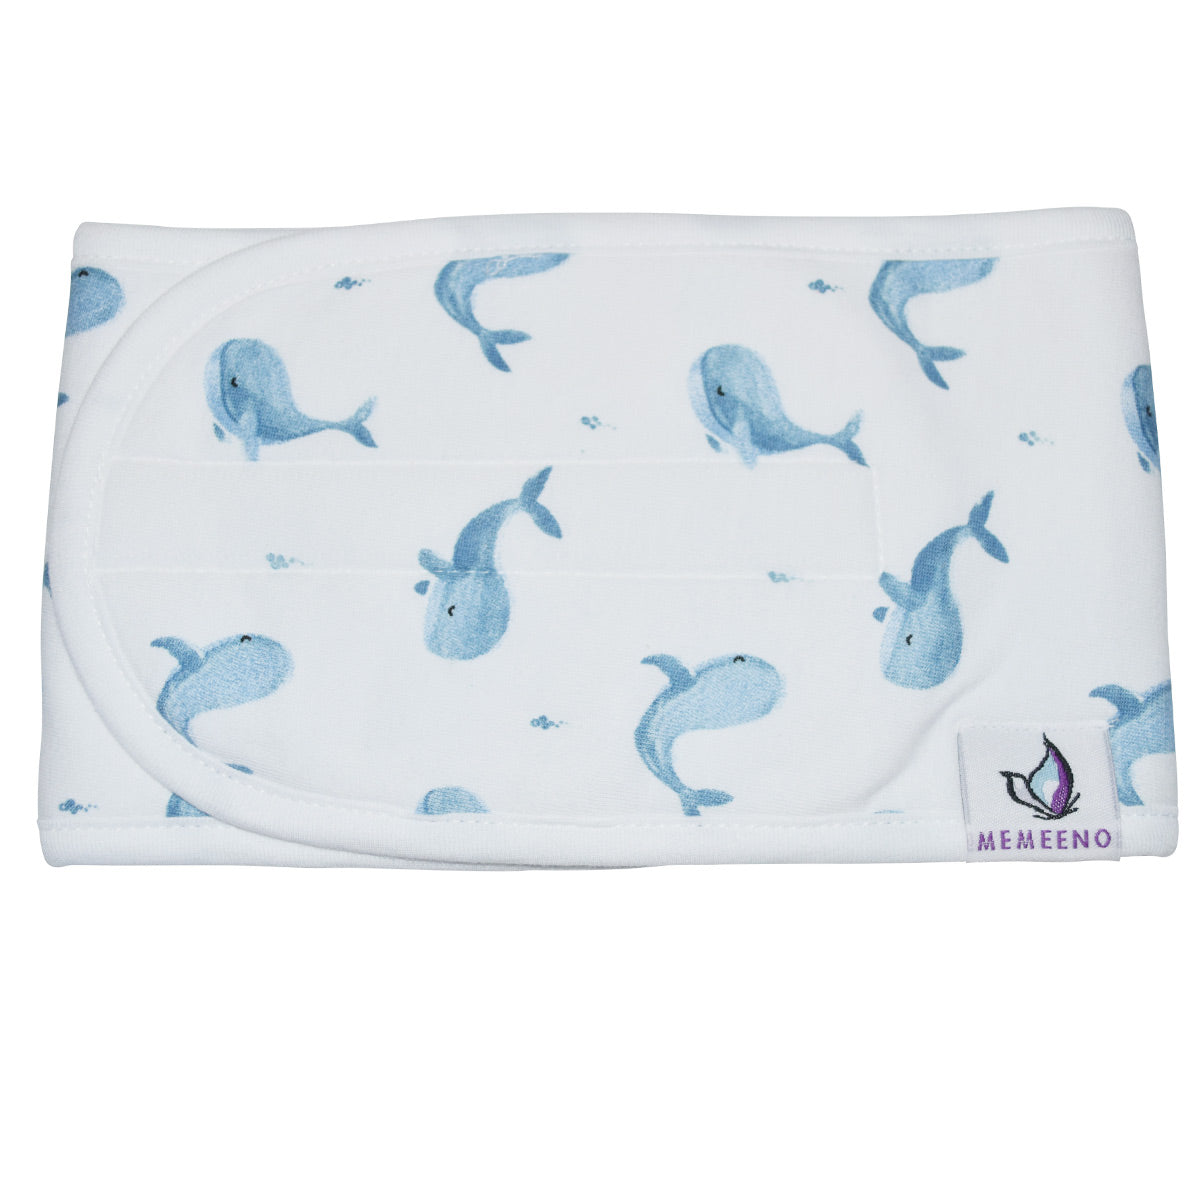 Whale ceta organic cotton belly band for newborns to one year old babies